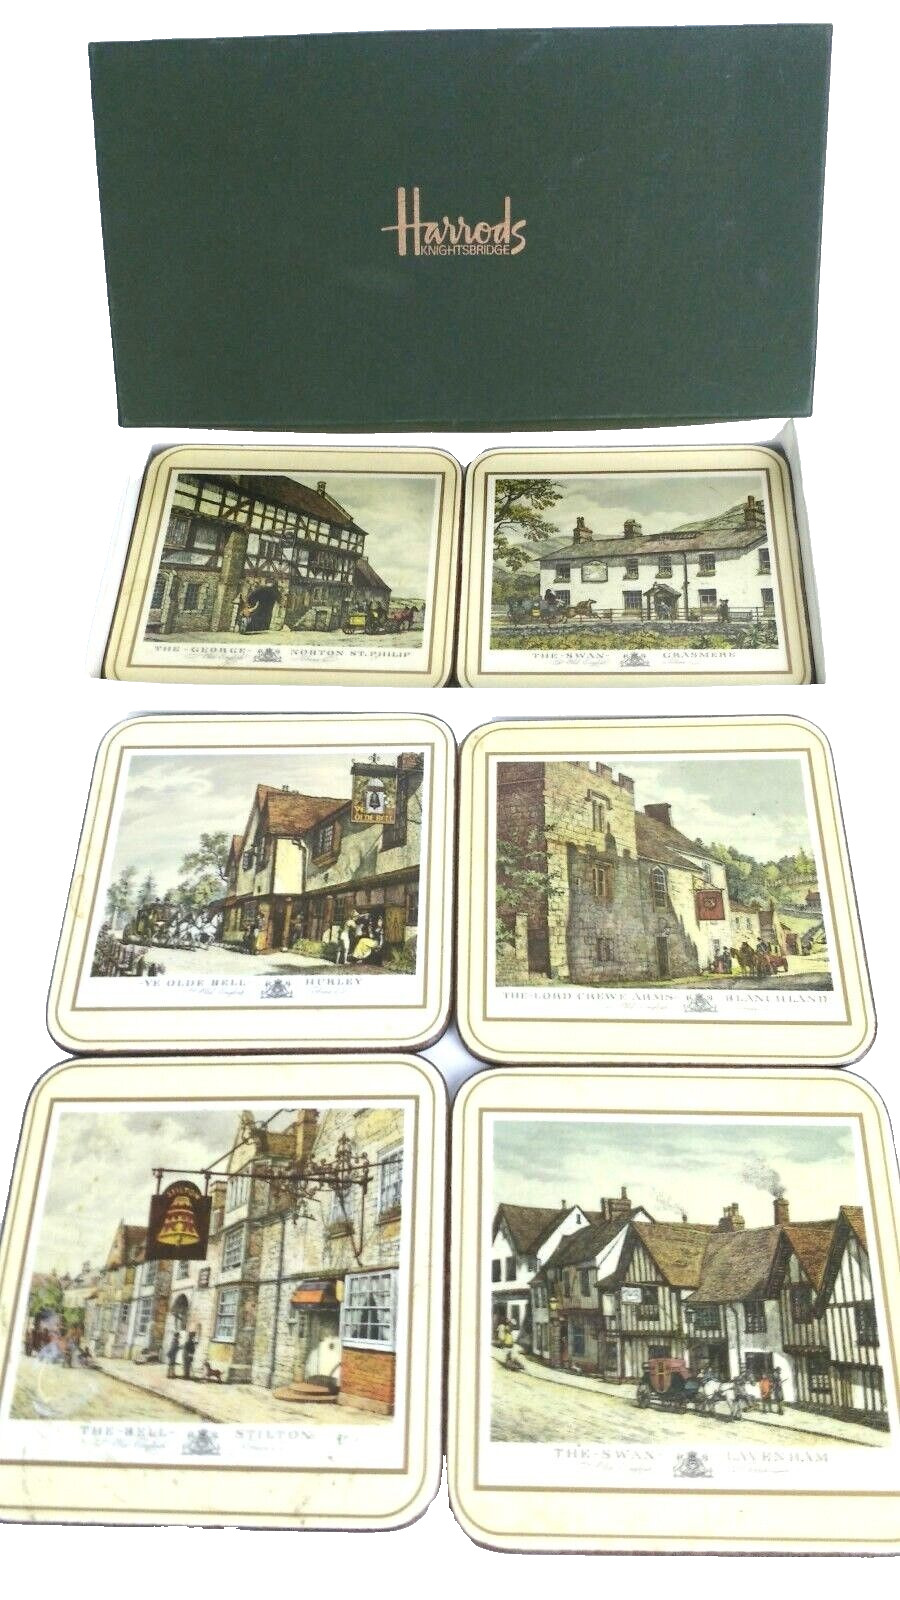 Harrods Knightsbridge Deluxe Coasters by Pimpernel Made in England Vintage